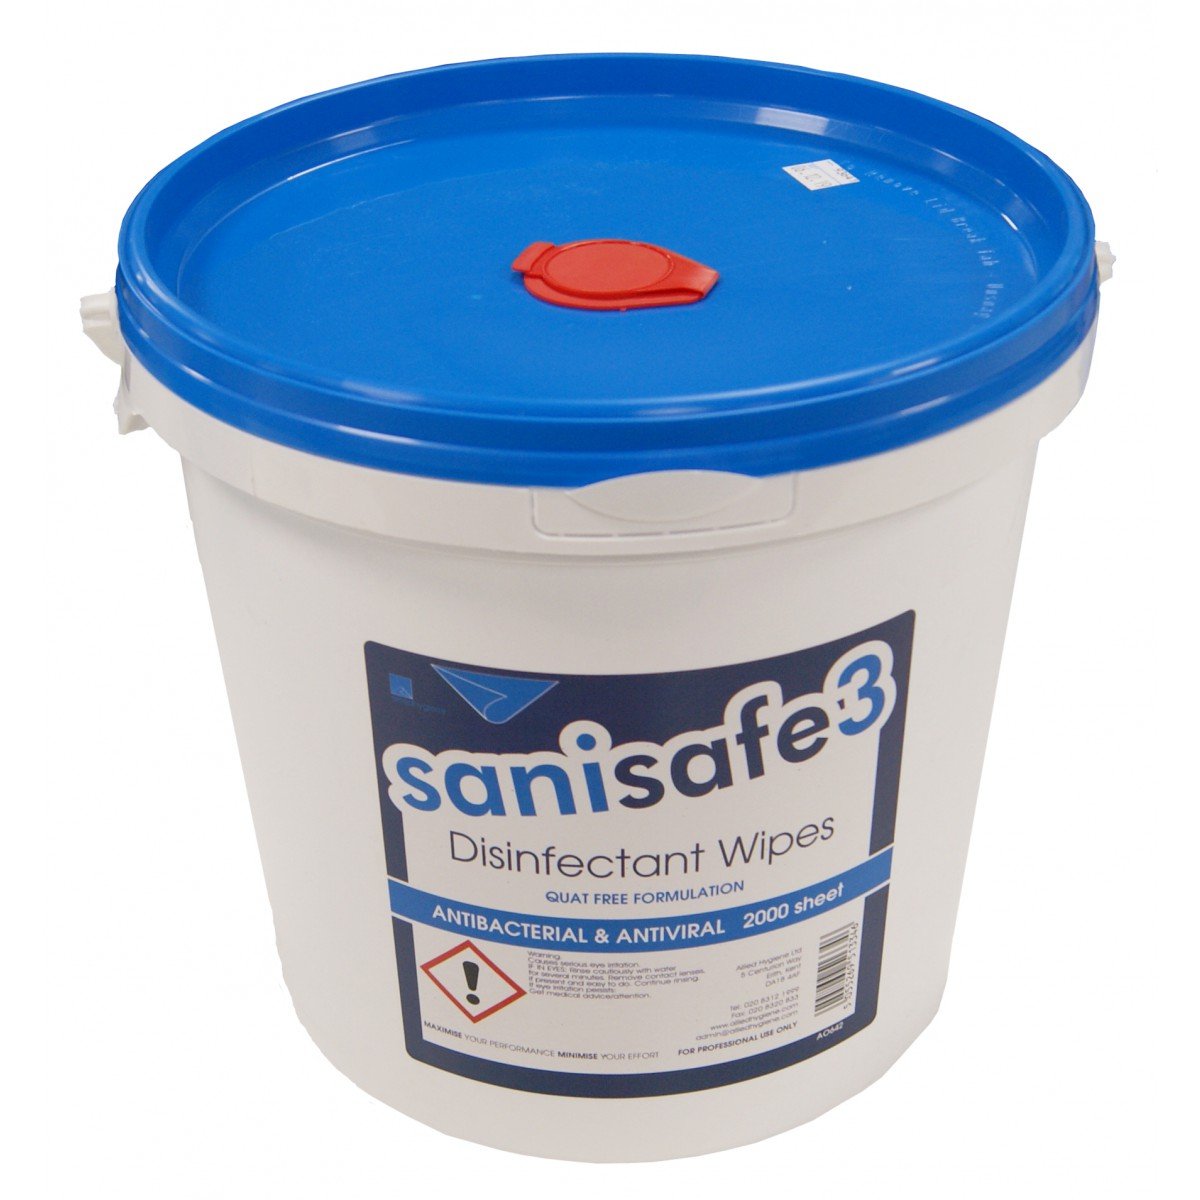 Sanisafe 3 Disinfectant Wipes Bucket Colour - NULL Size - 180 x 